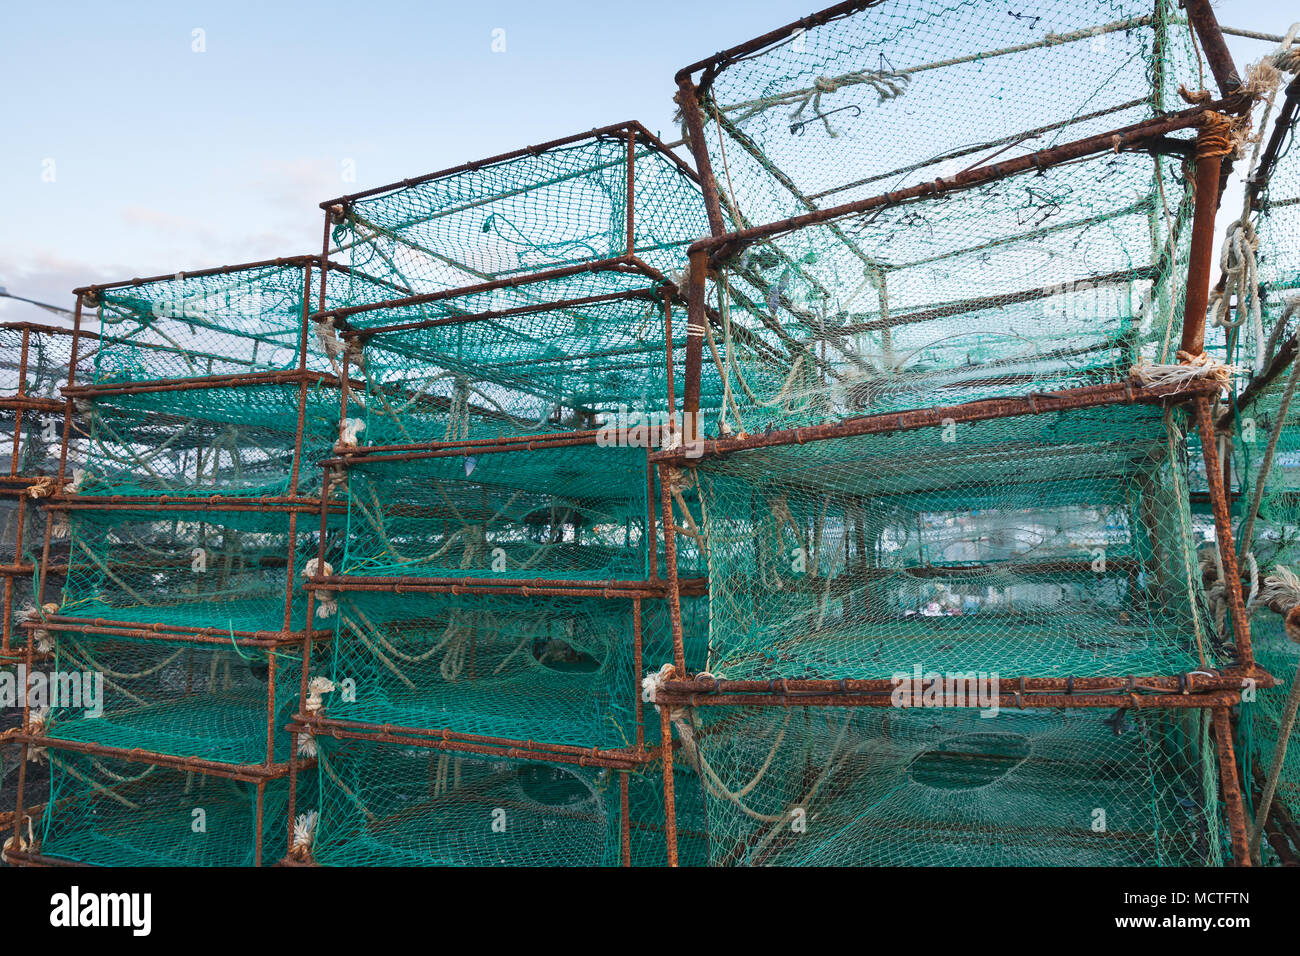 Pile group of fishing cage traps — Stock Photo © ccaetano #53180391